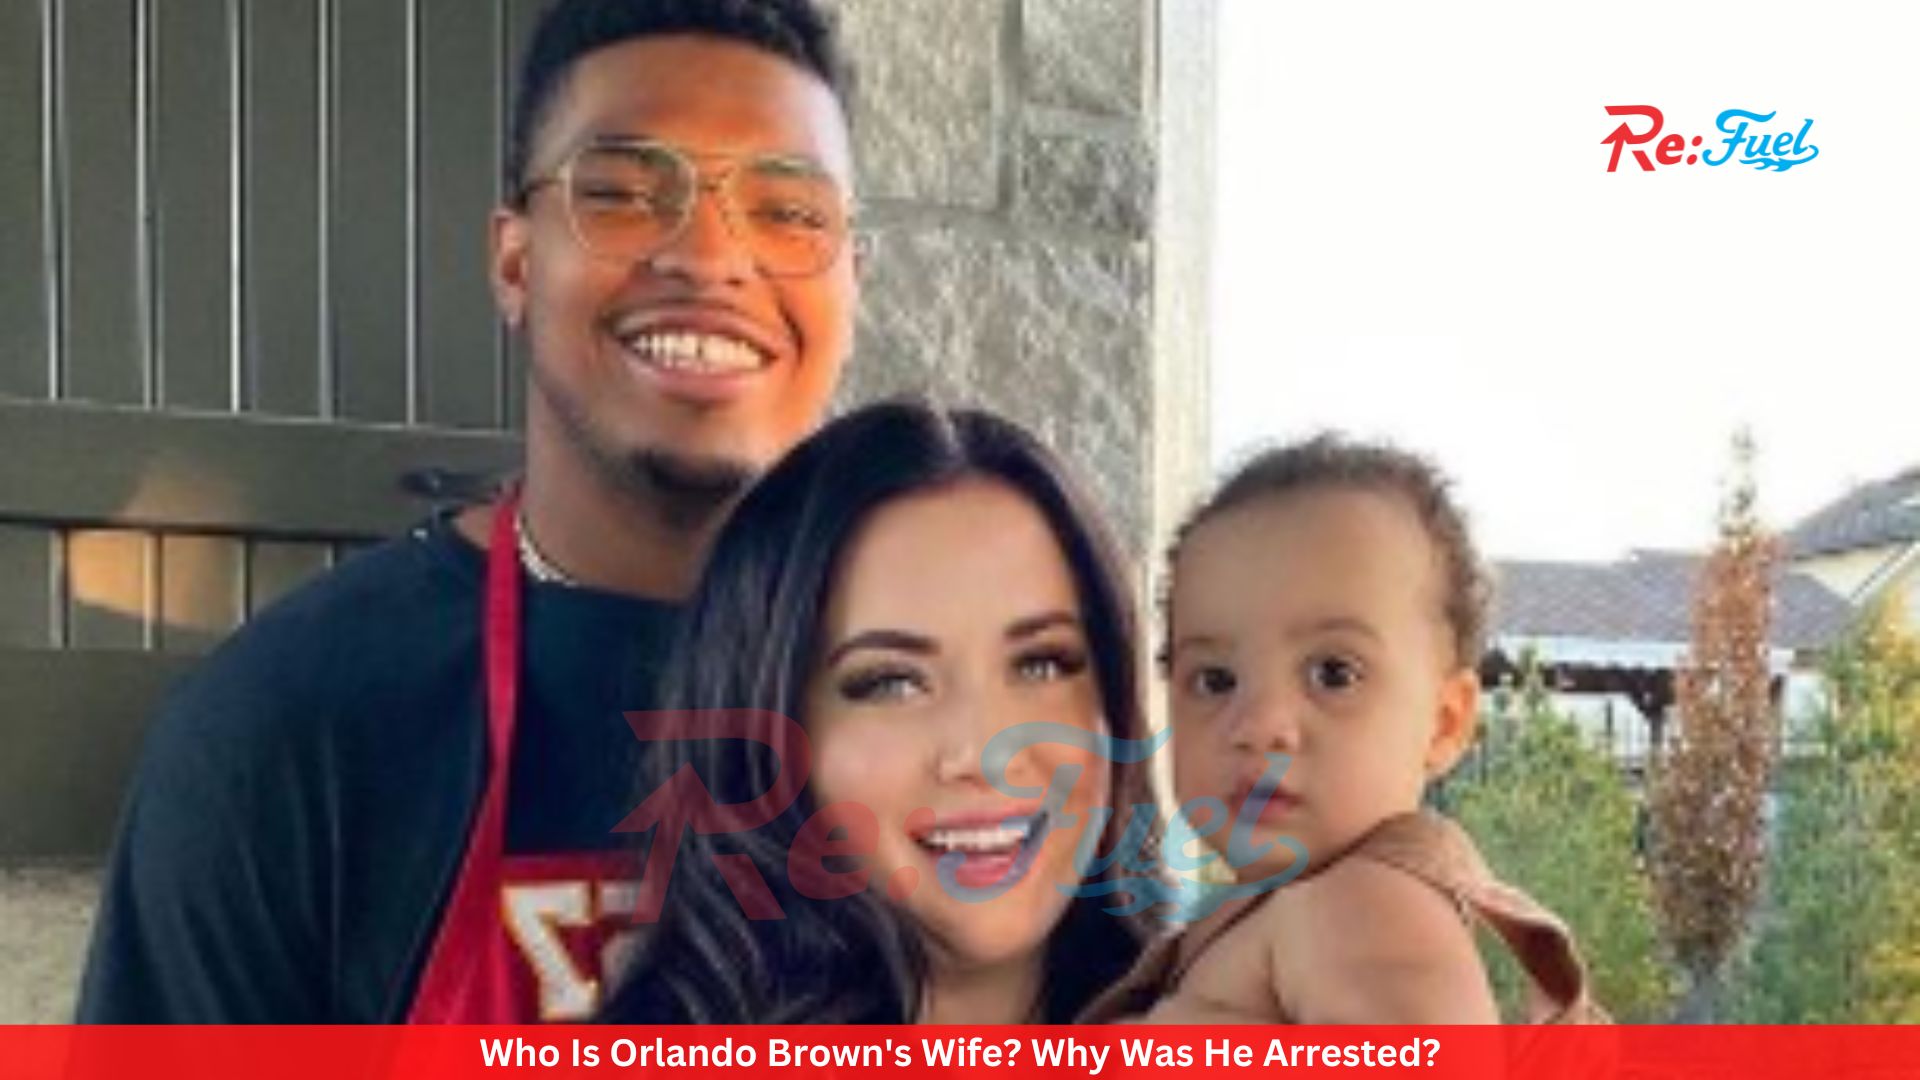 Who Is Orlando Brown's Wife? Why Was He Arrested?